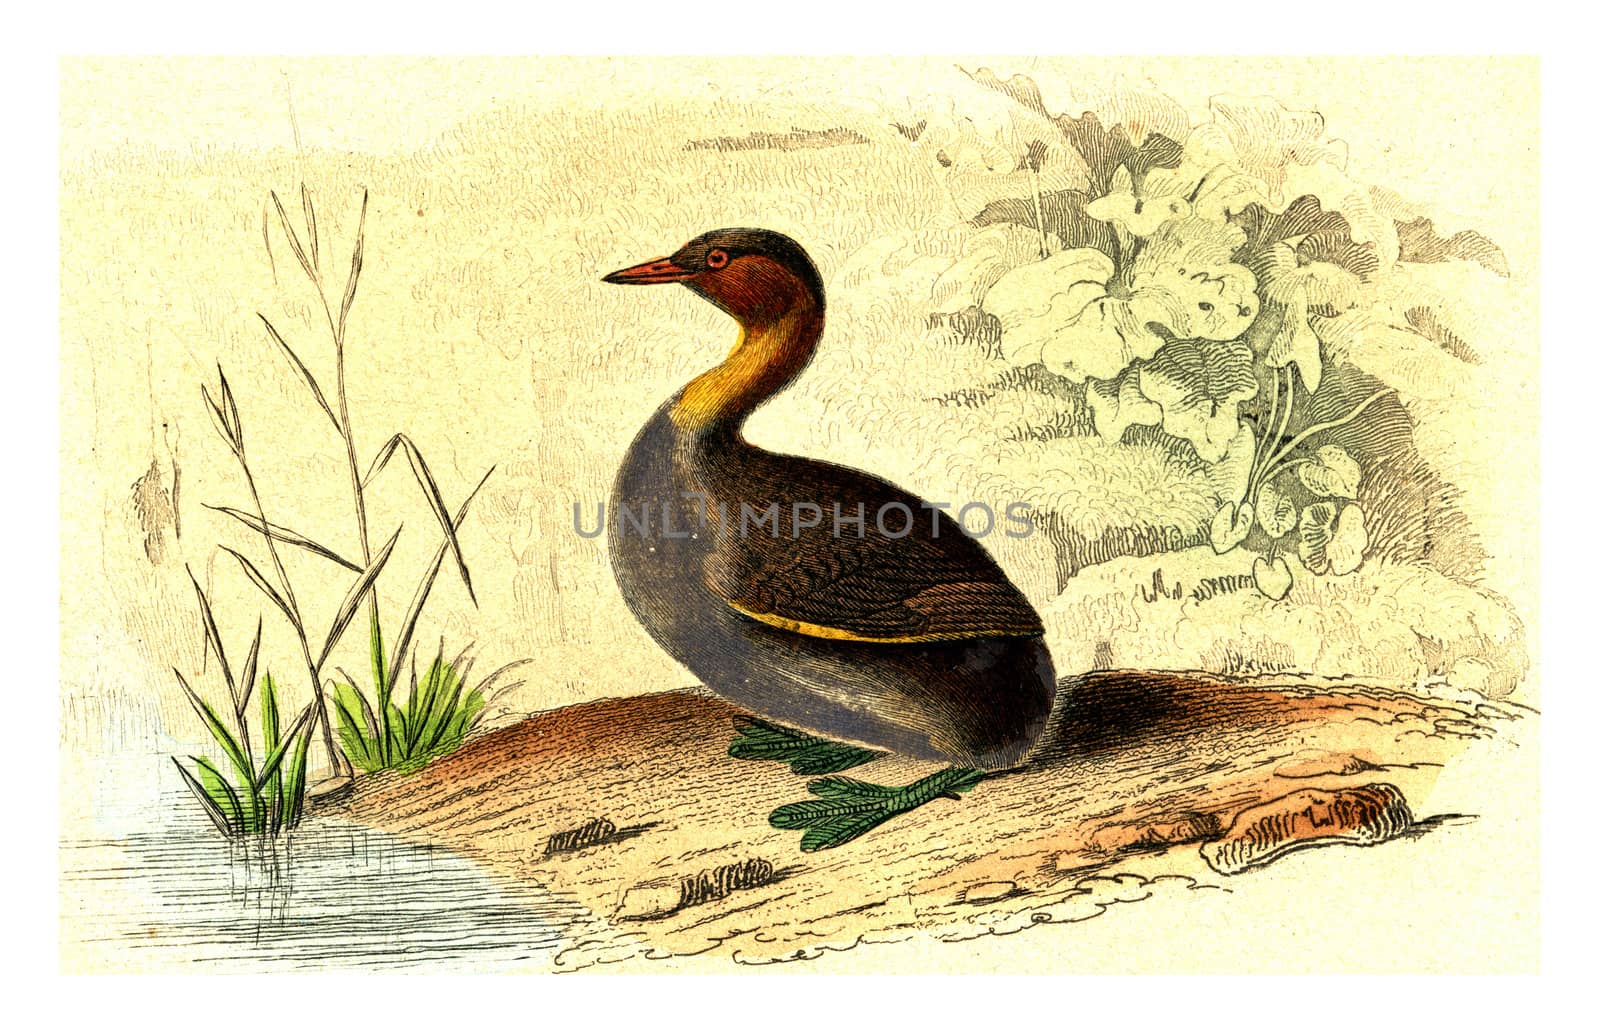 The grebe, vintage engraving. by Morphart